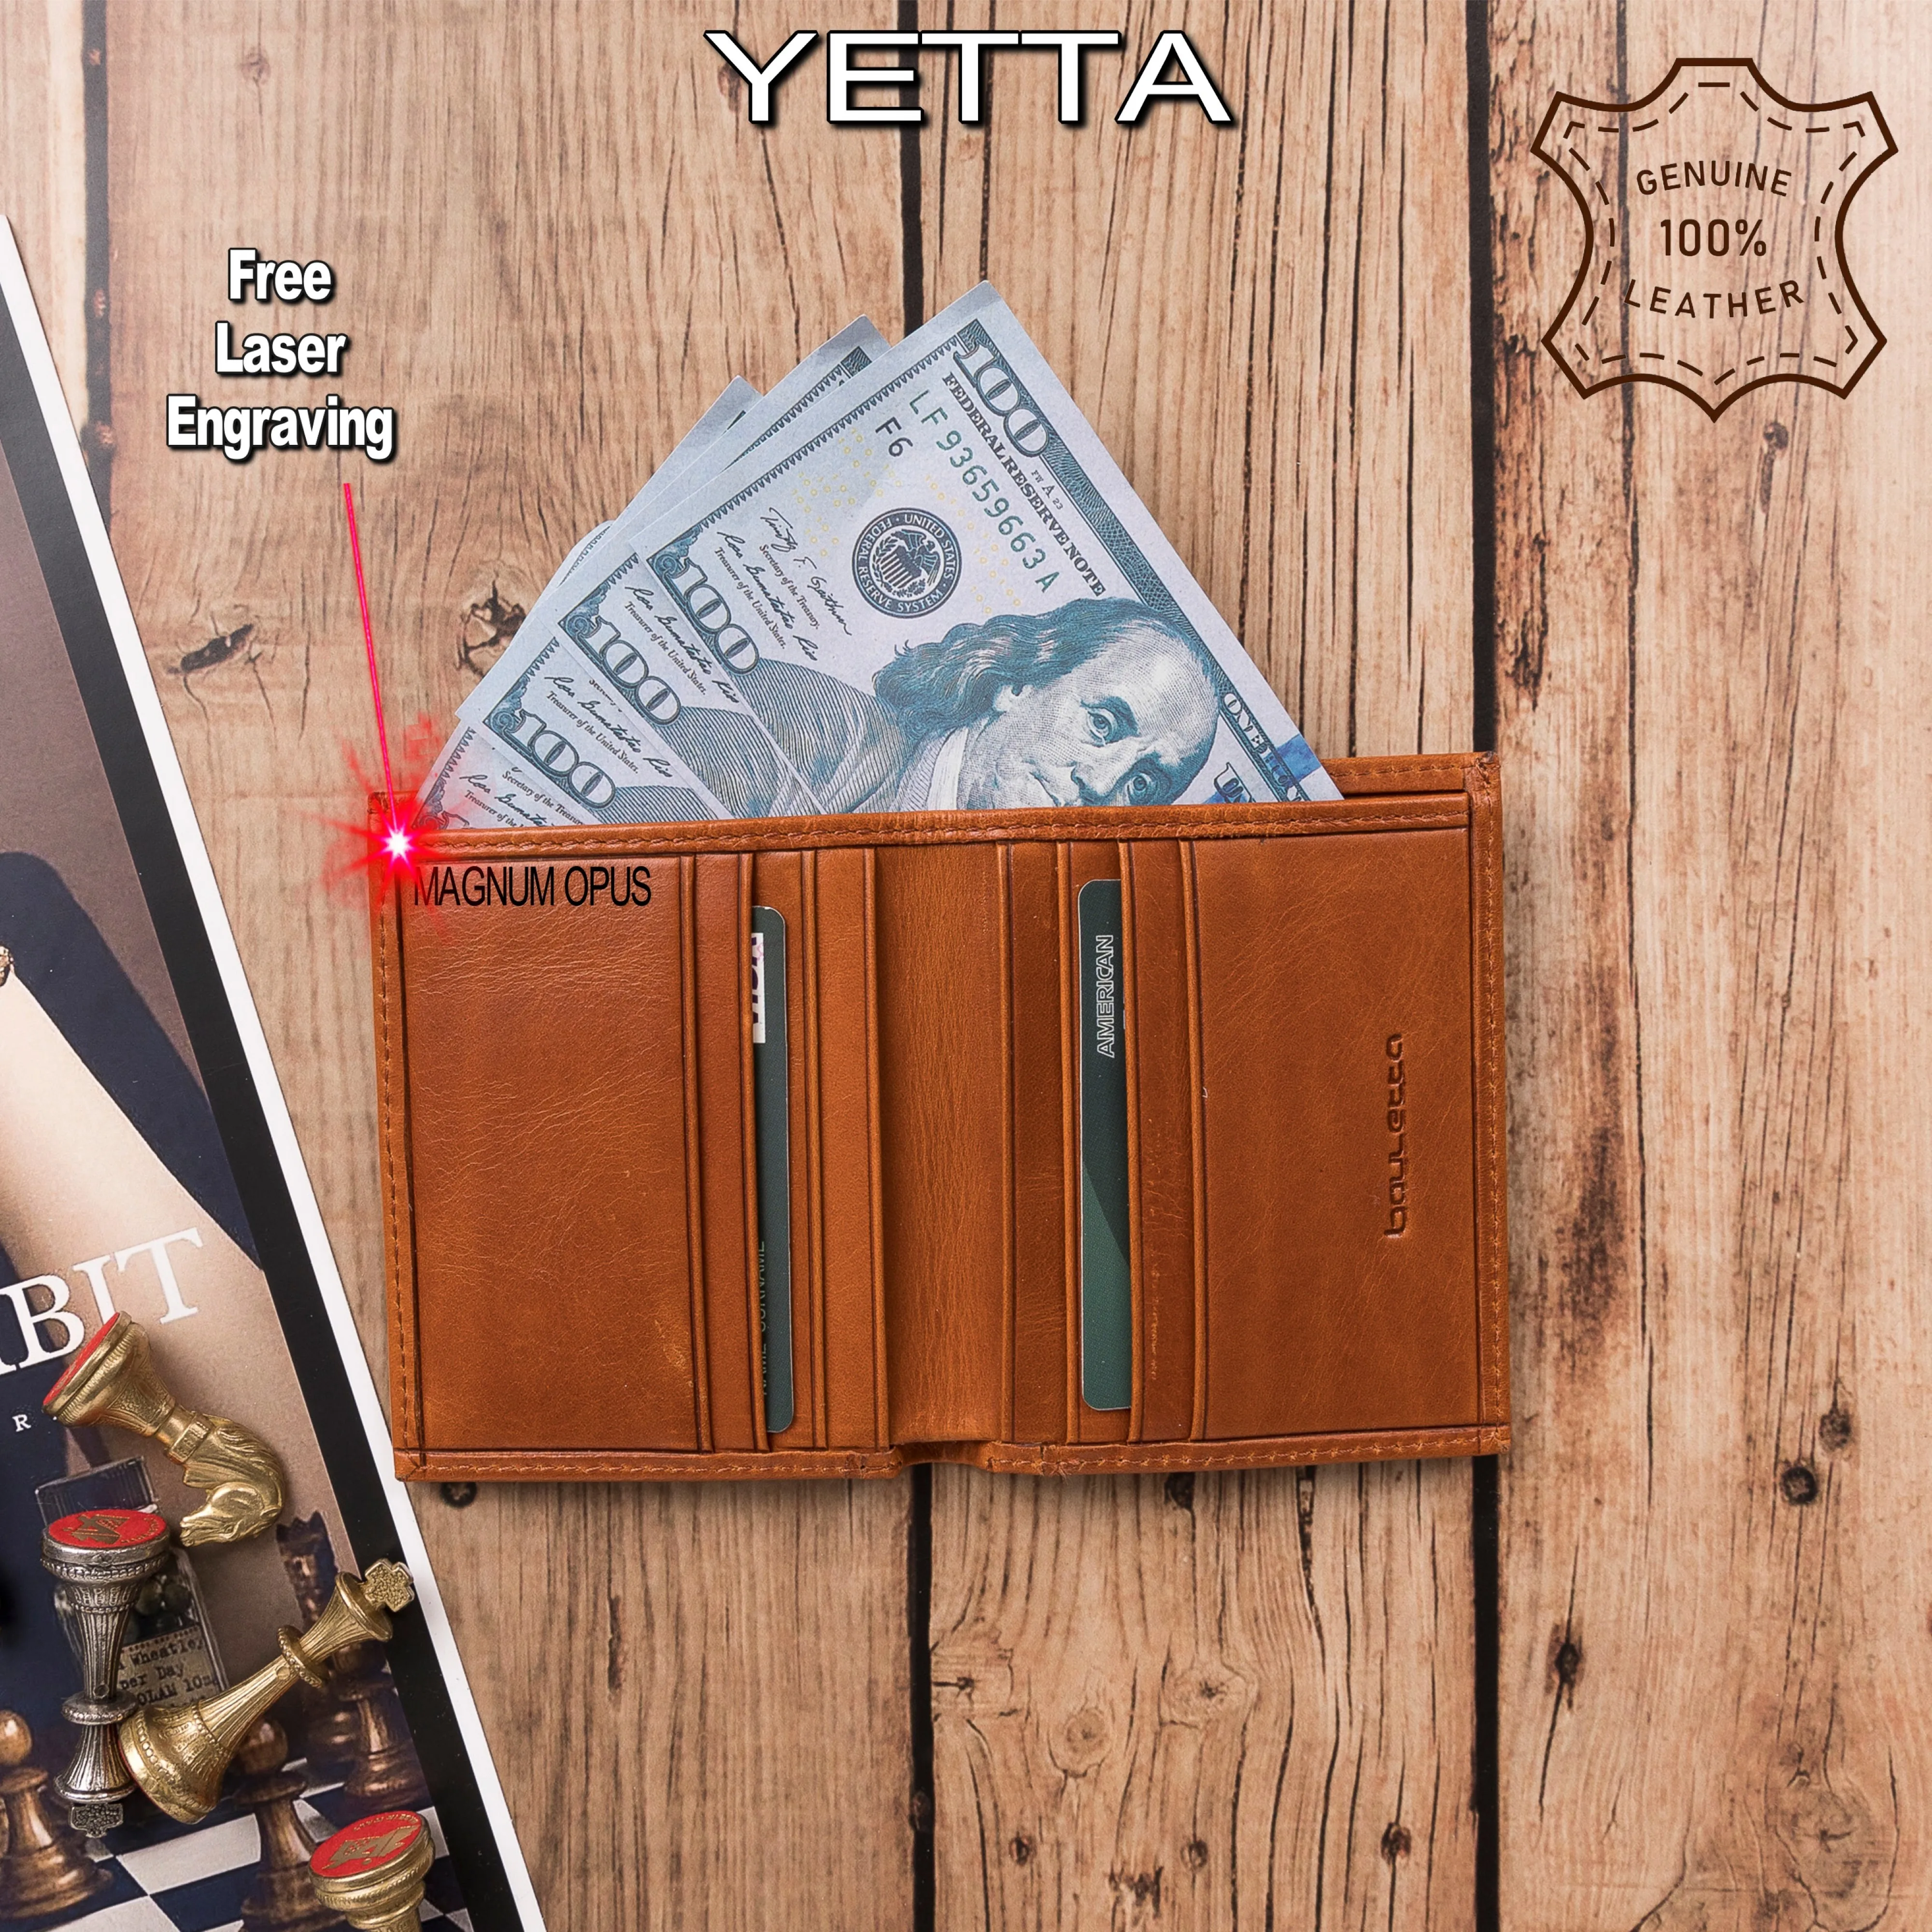 Handmade Genuine Leather Card Holder Wallet Book Type Closure that Holds up to 8 Cards and Paper Money Minimalist Elegant